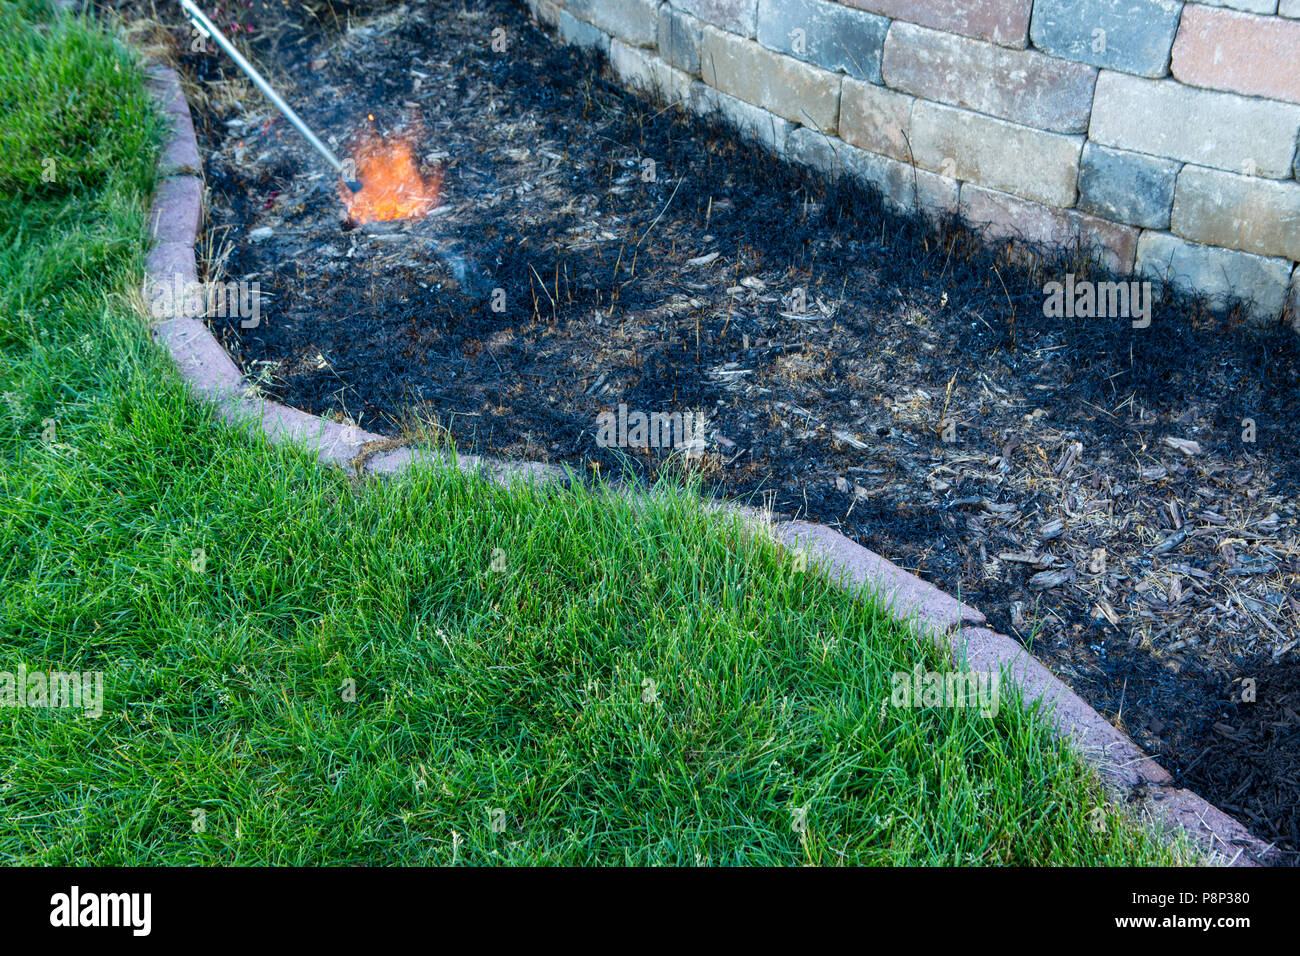 Gardener using a torch to burn unwanted grass and weeds in a flowerbed alongside a wall before mulching and planting in spring Stock Photo